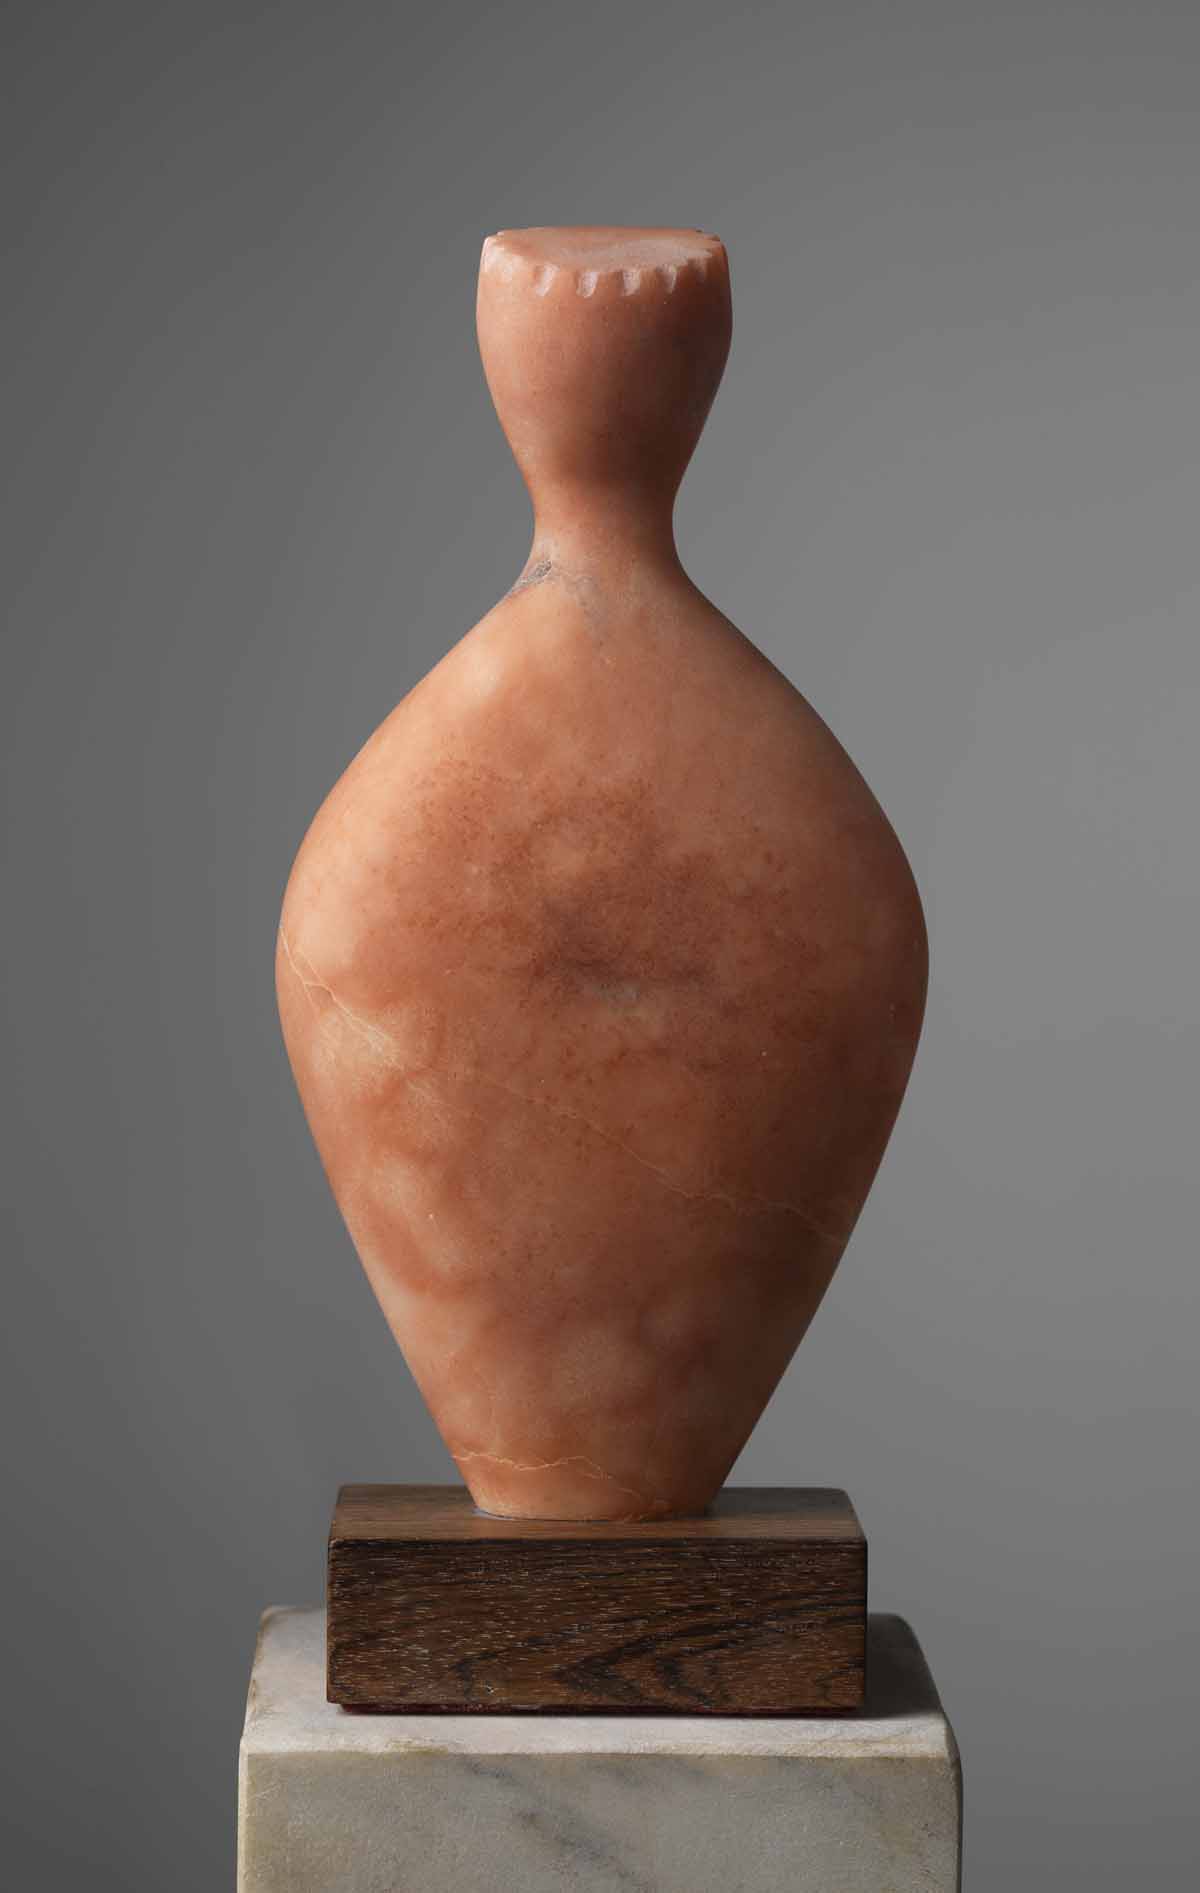   Untitled Head and Torso 1 (Abstract),&nbsp; Red alabaster on a wood plinth, 11" x 5.5" x 2.5" 